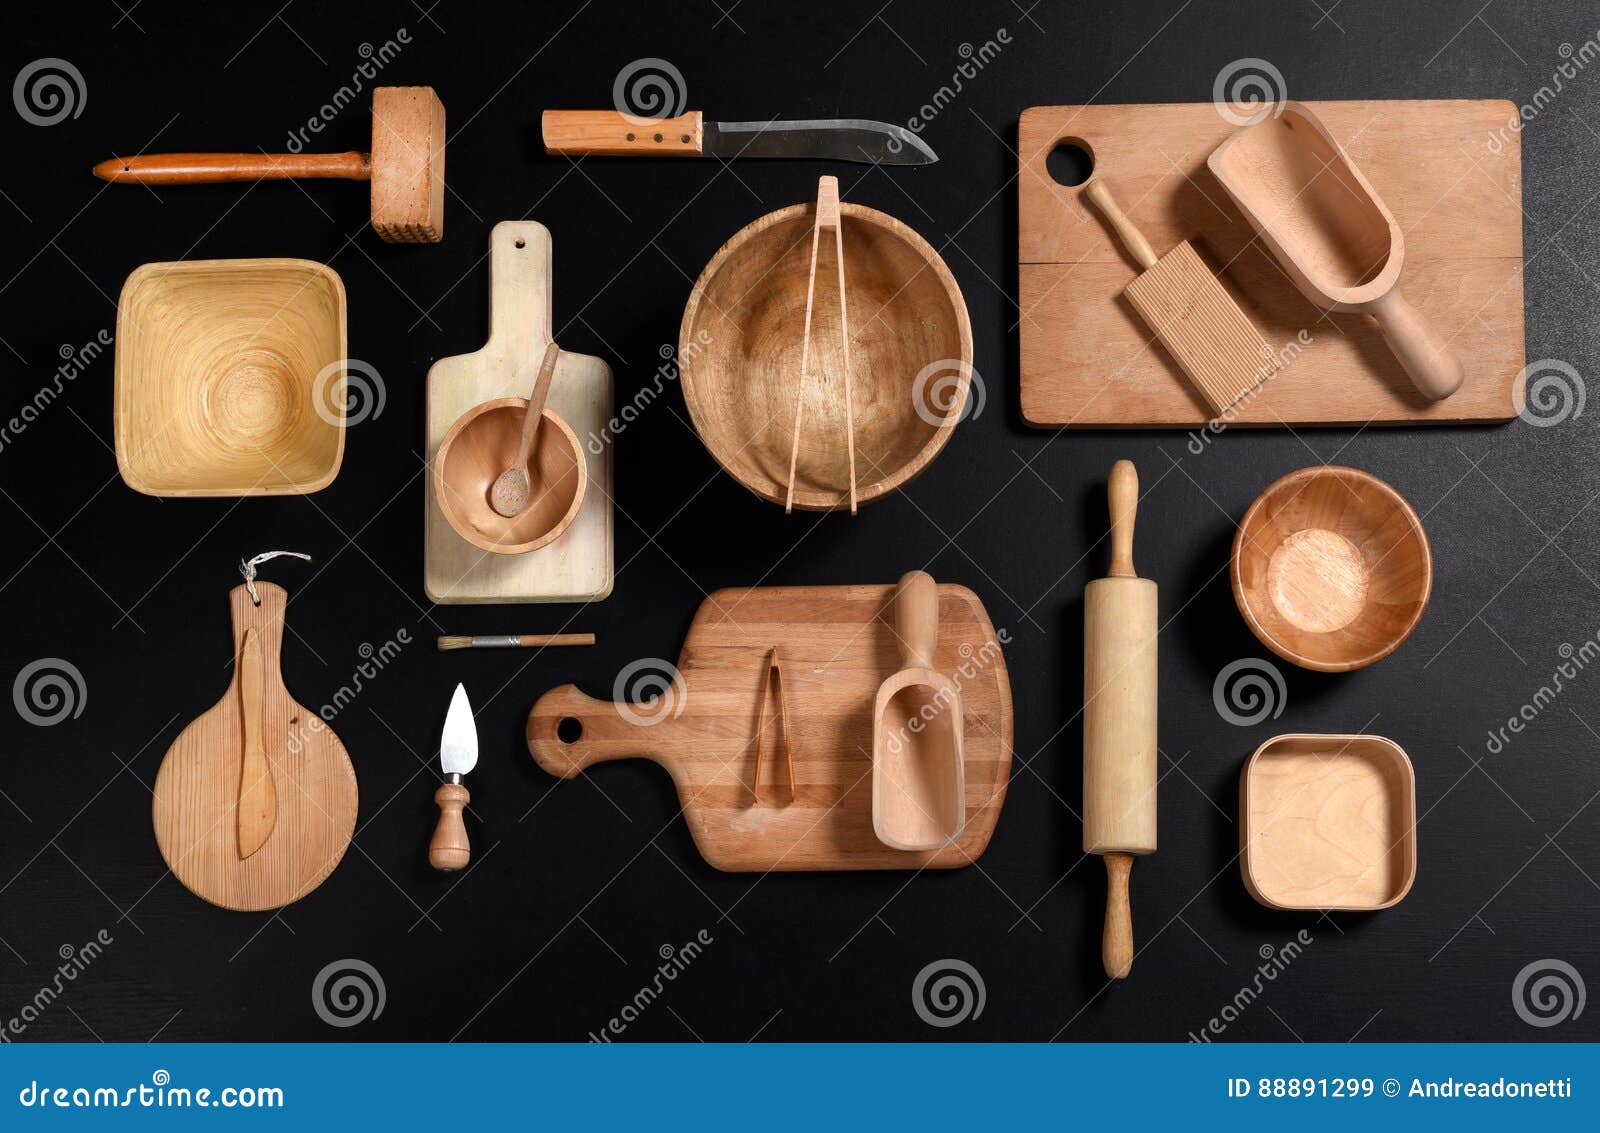 Collection of Wooden Kitchenware and Tools Stock Image   Image of ...